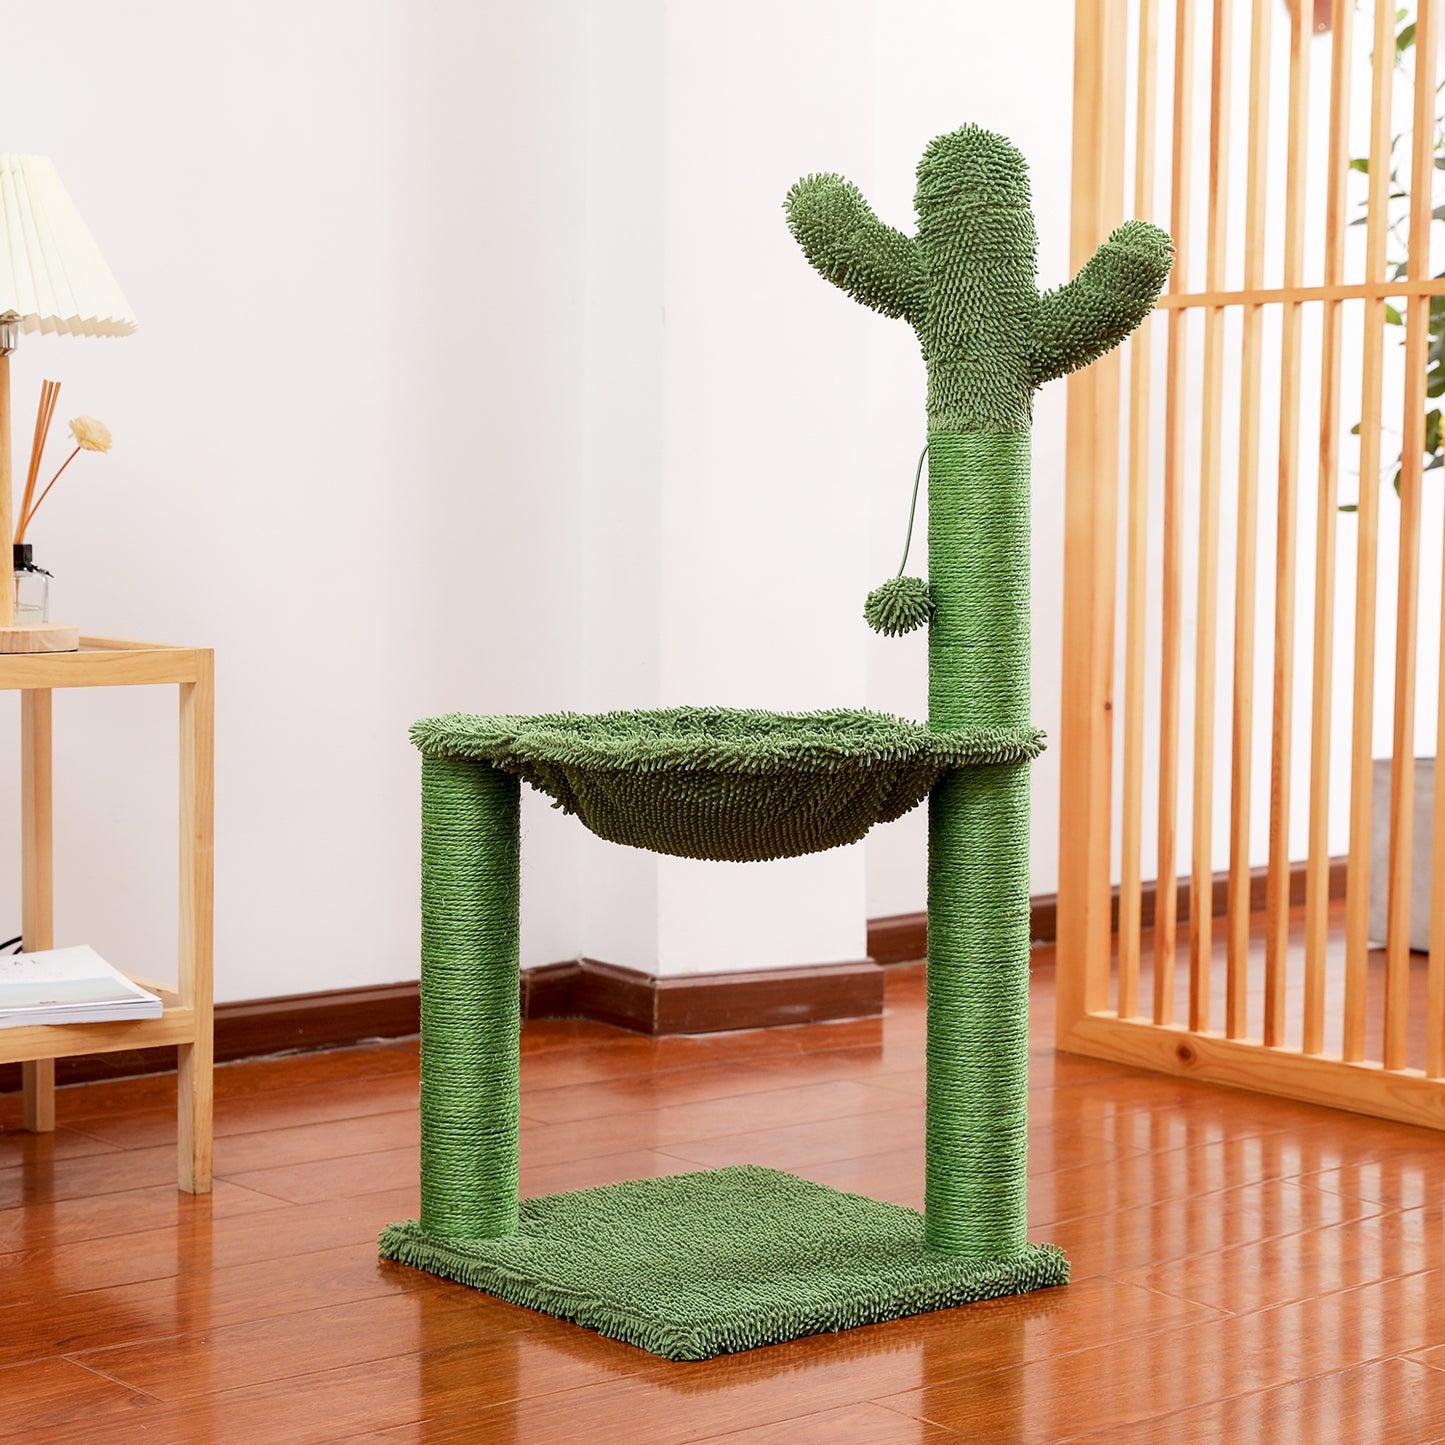 Cactus Cat Scratcher - Cat Cactus Scratching Post with Ball,Natural Sisal Ropes - save Your Furniture with Durable Handmade Cactus Cat Tree - Loads of Entertainment for Your Cat